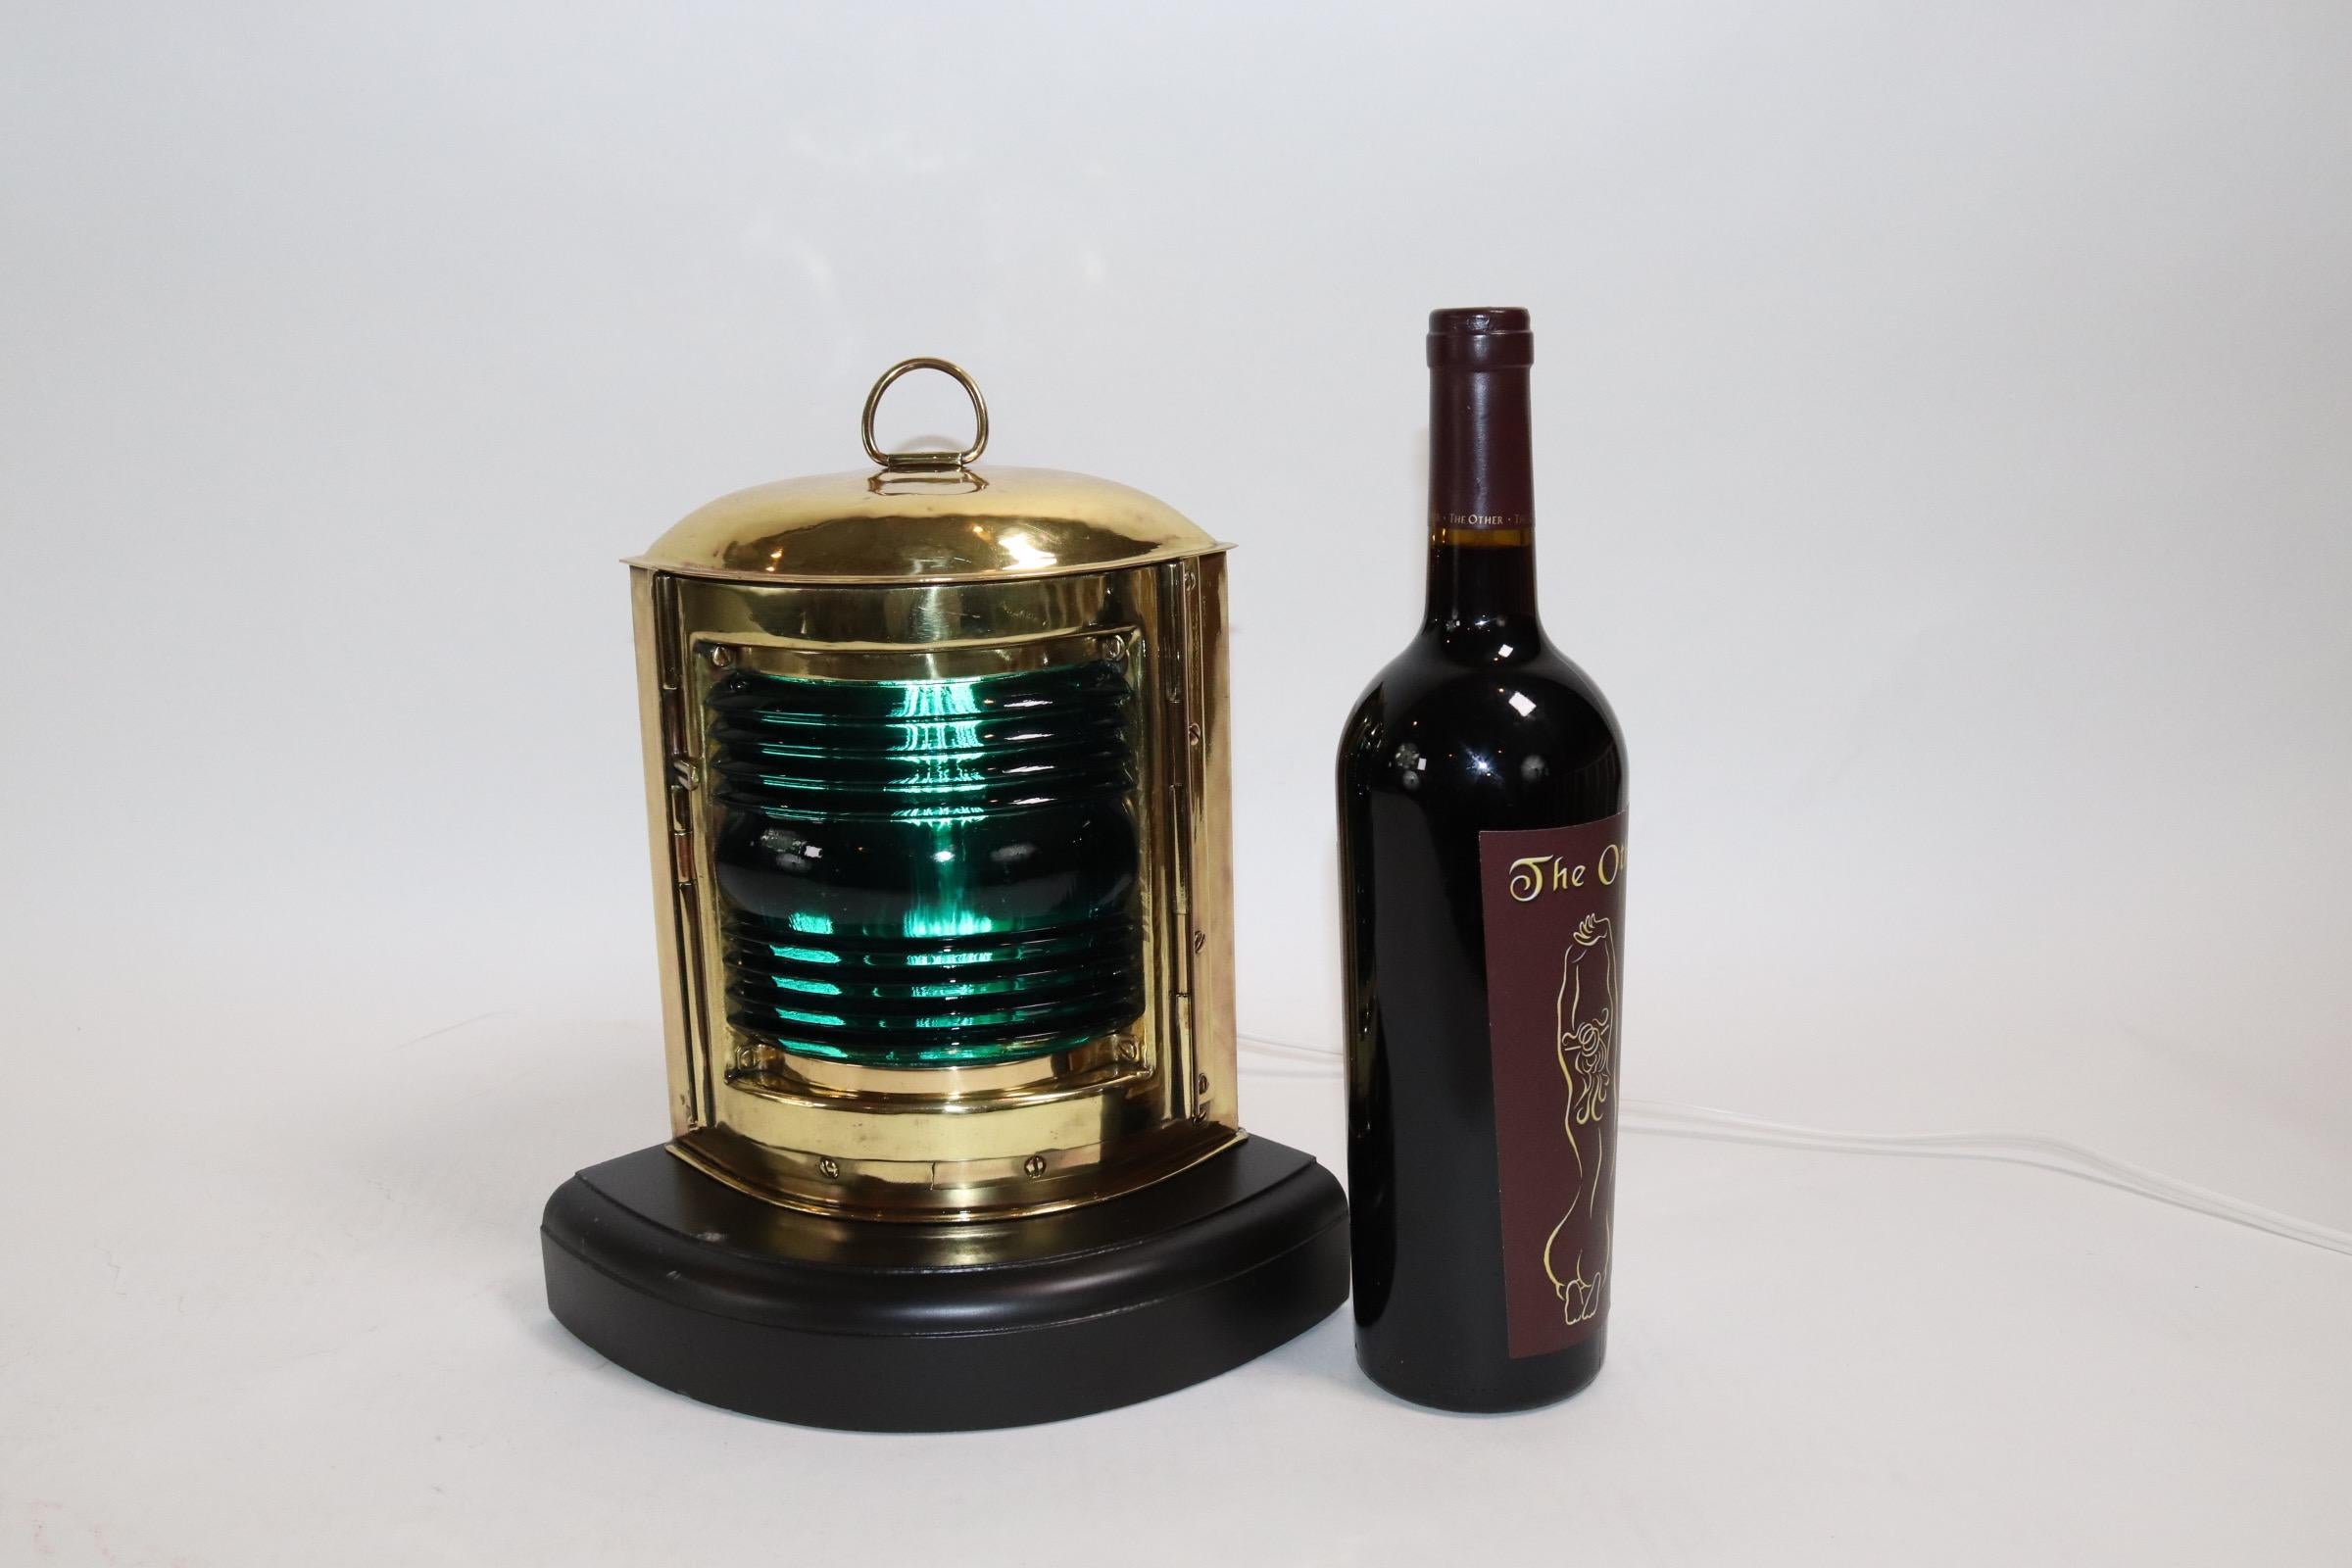 Starboard boat lantern with highly polished and lacquered finish and mounted to a thick wood base with routed edge. Lantern has been wired for home display. Weight is 4 pounds.